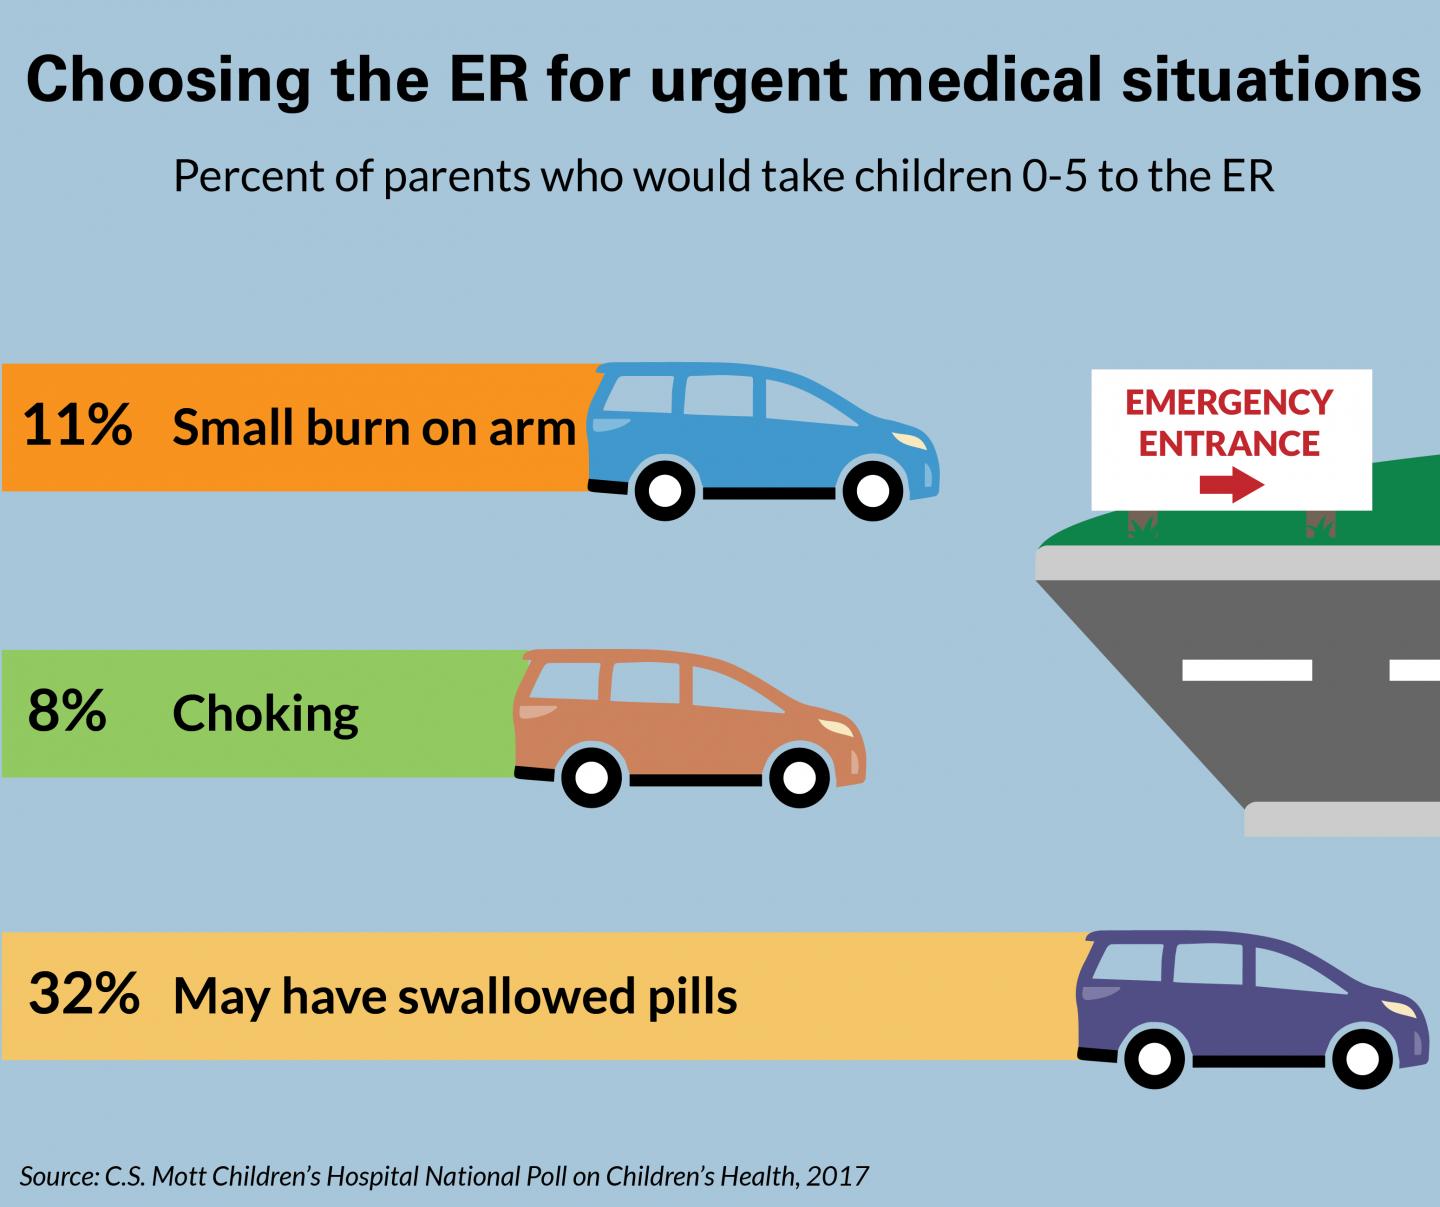 Mott Poll: Should Your Child Go to the ER?